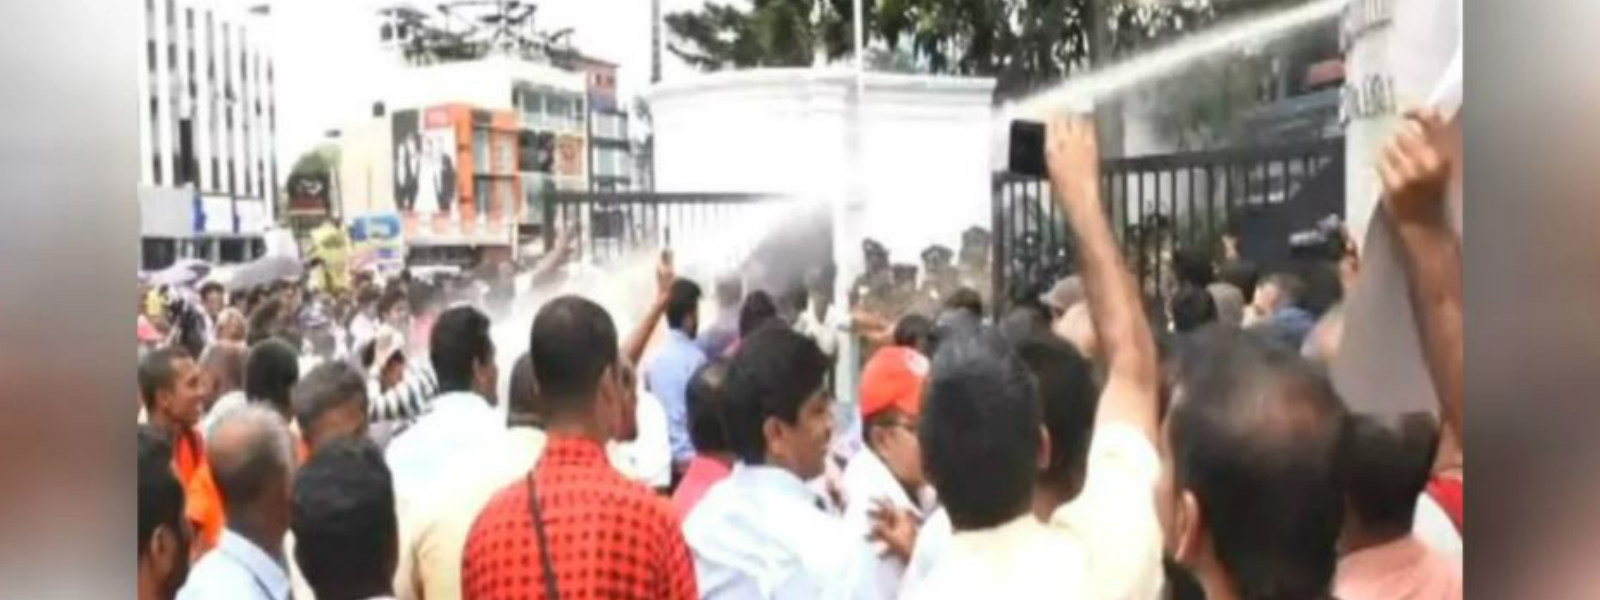 Teachers Union take actions against teargas attack